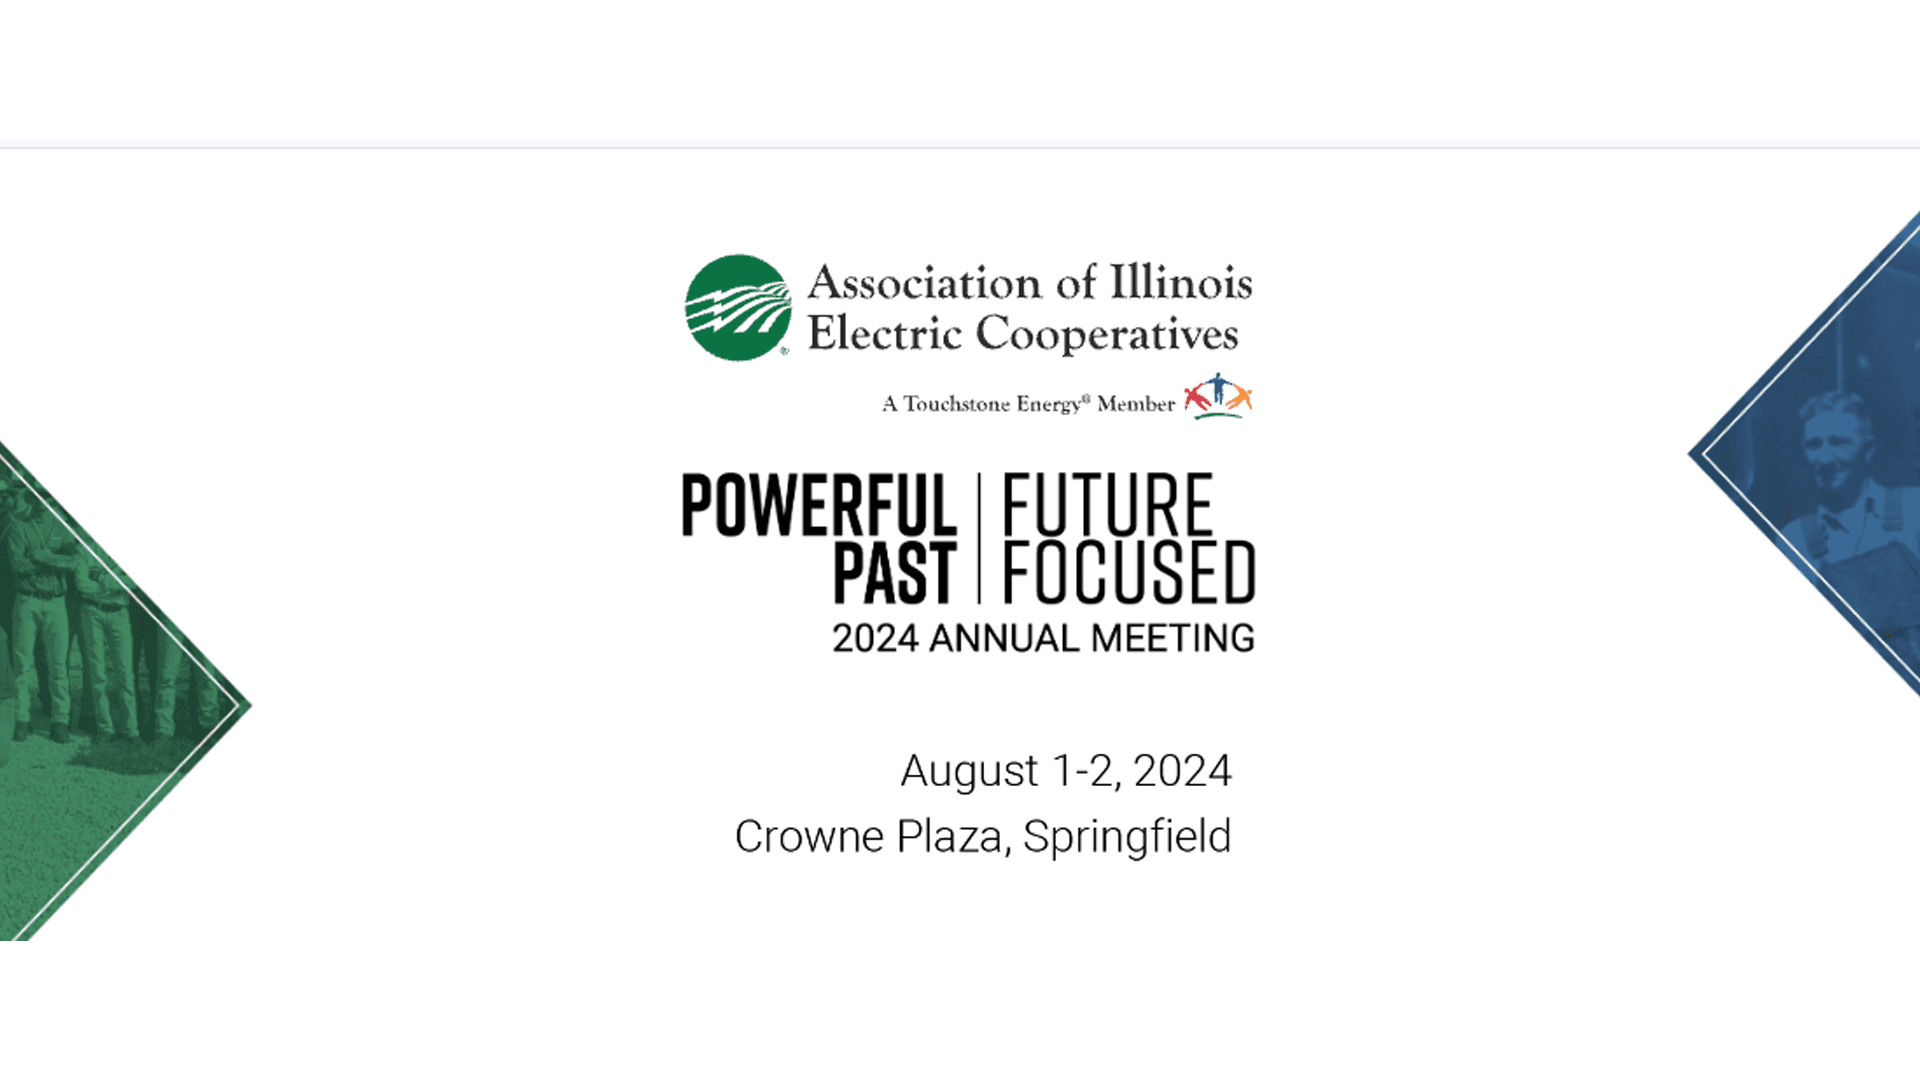 Association of Illinois Electric Cooperatives Annual Meeting, Springfield, IL